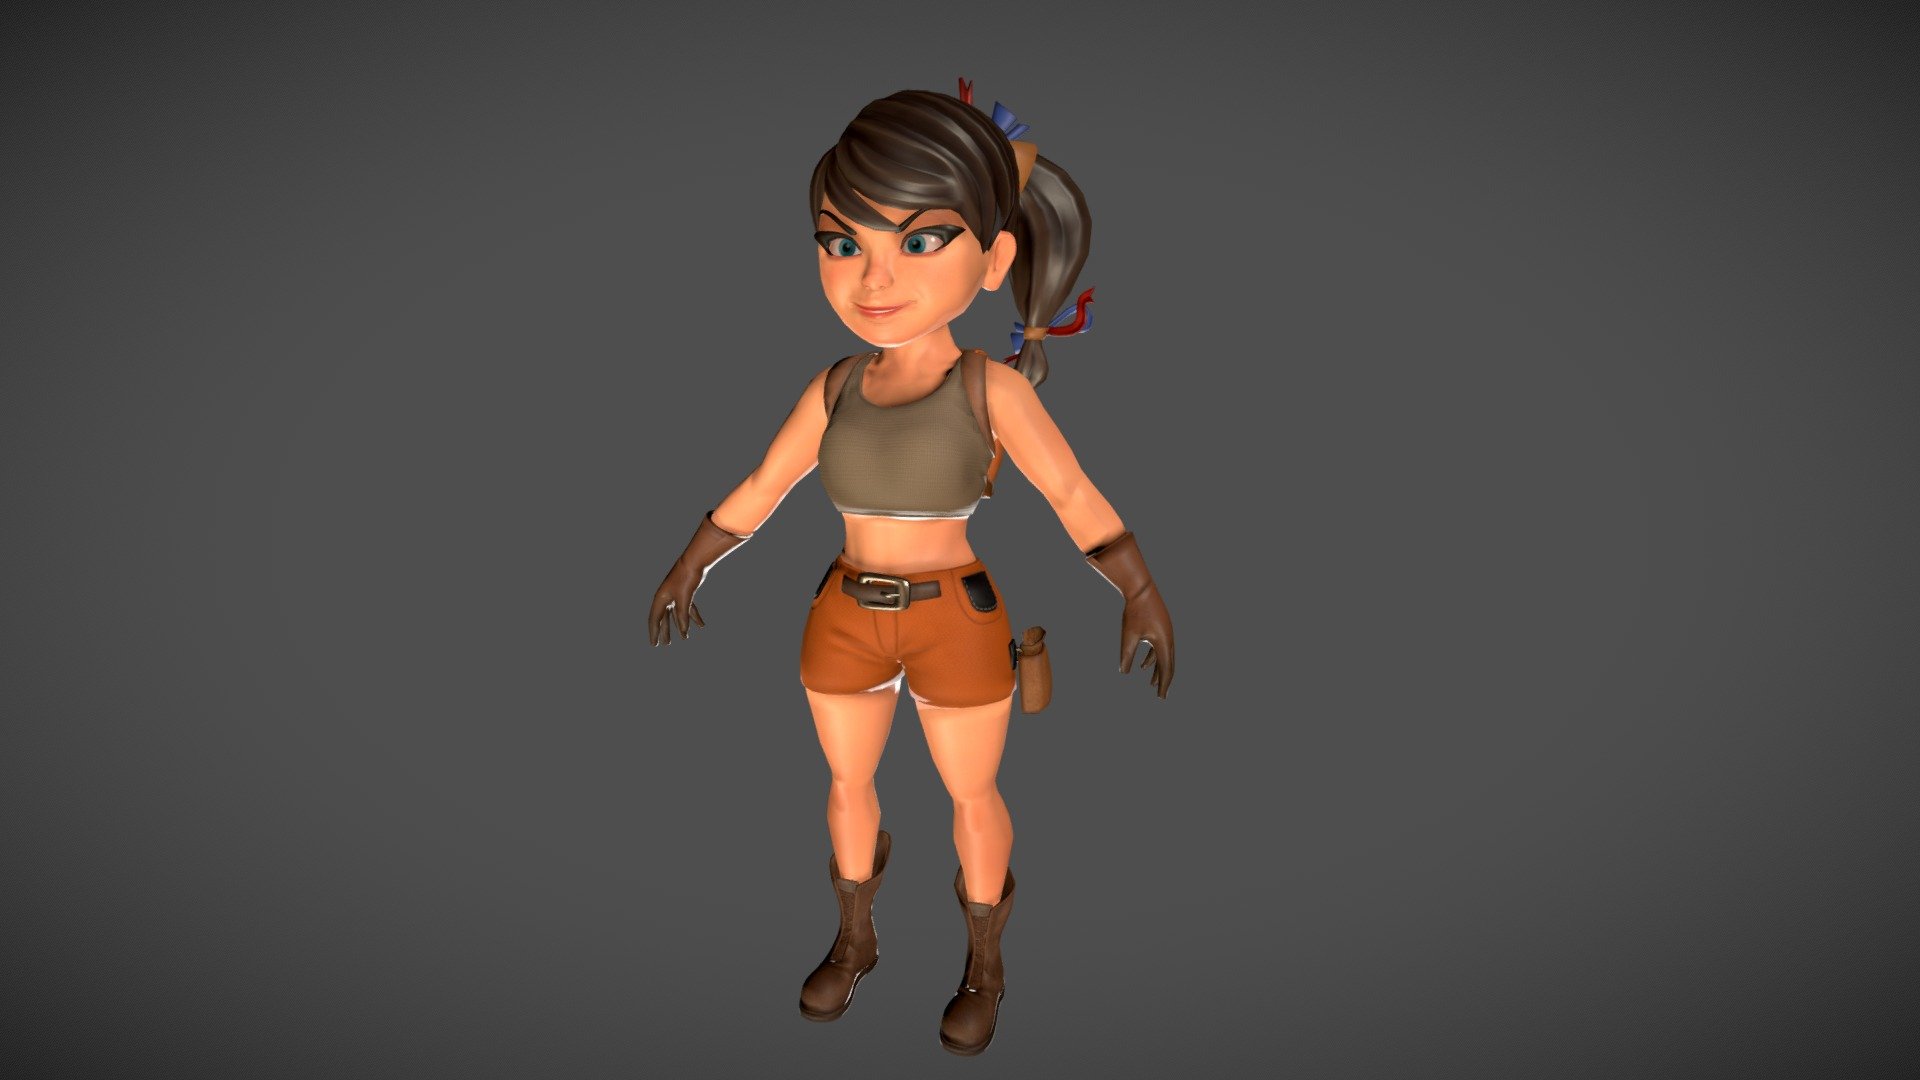 Stylized Female Character
This is game-ready low-poly model. 
Made with Zbrush, Blender, Substance Painter
12,548 faces/24,881 triangles - Stylized Female Character - 3D model by Kirill Tsarenko (@kirill_tsarenko_art) 3d model